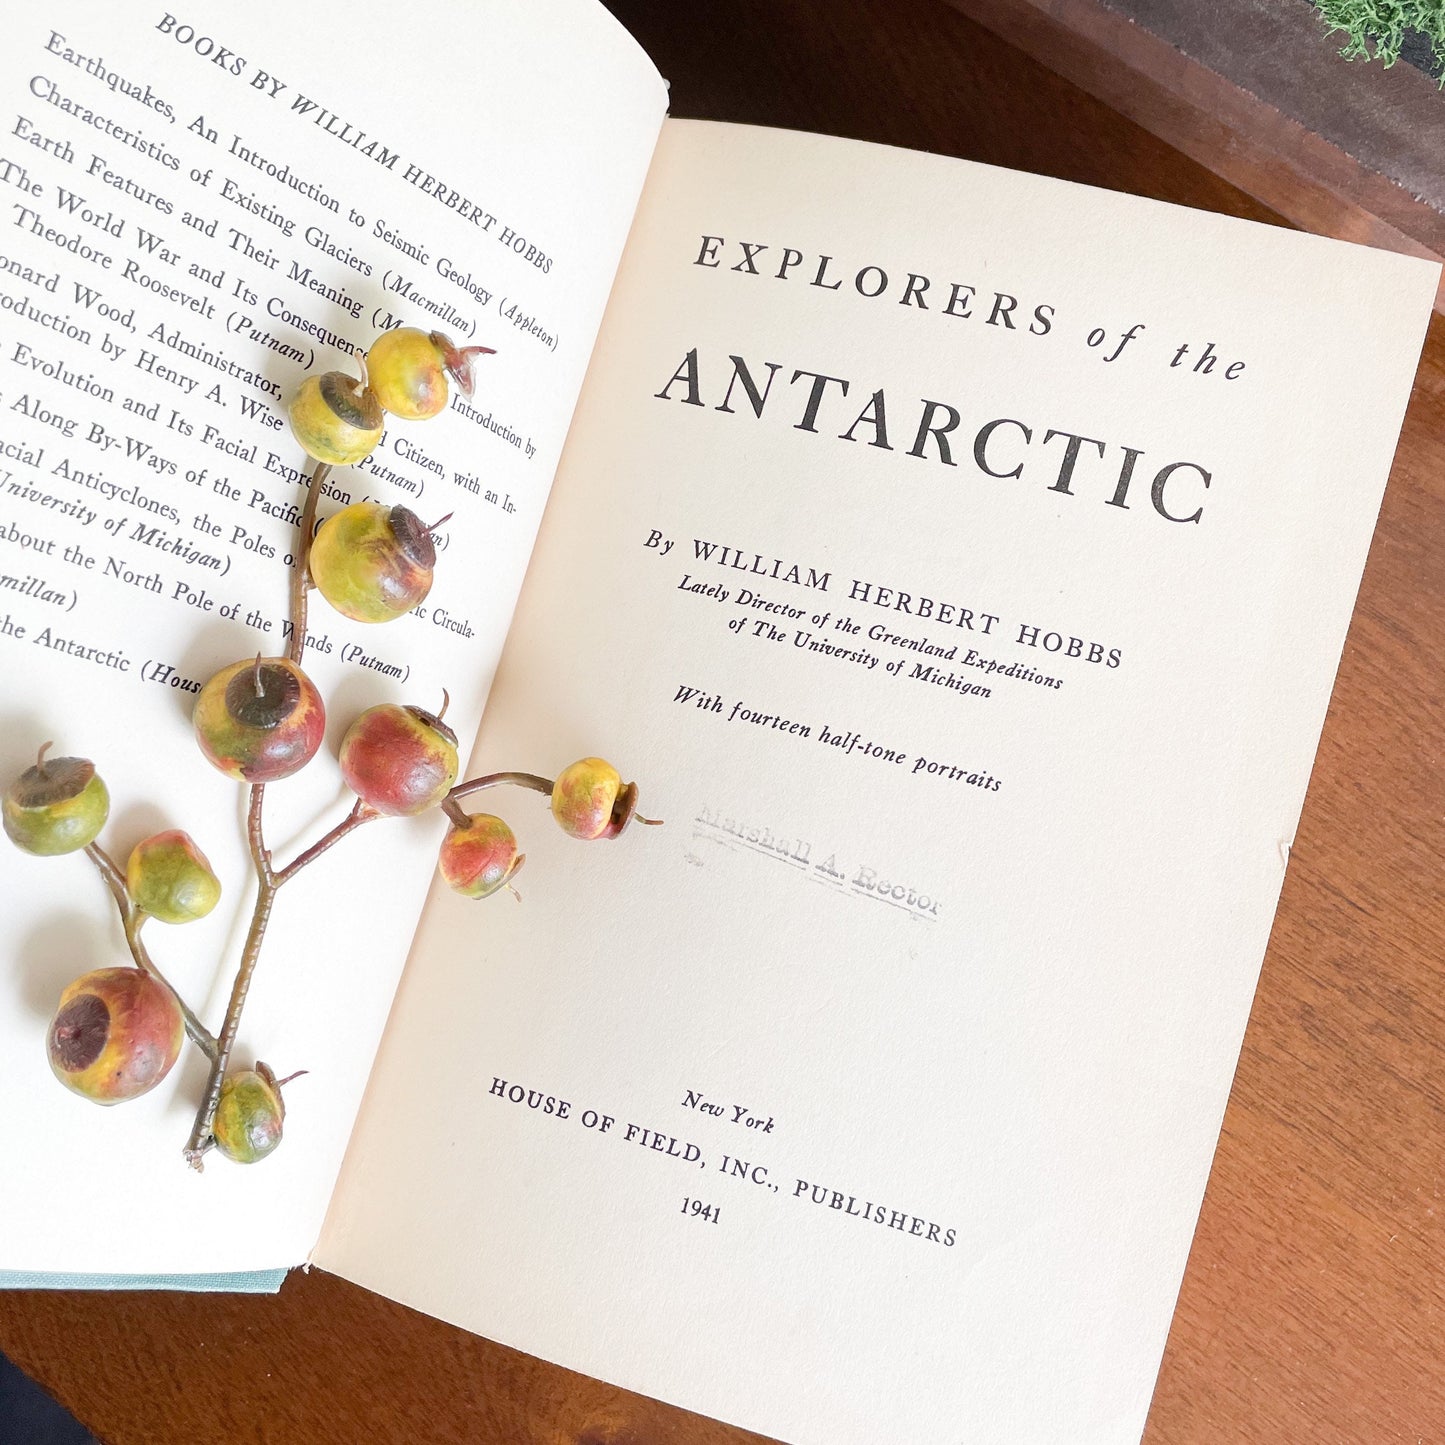 Signed Scarce Book, First Edition, Explorers of the Antarctic by William Herbert Hobbs